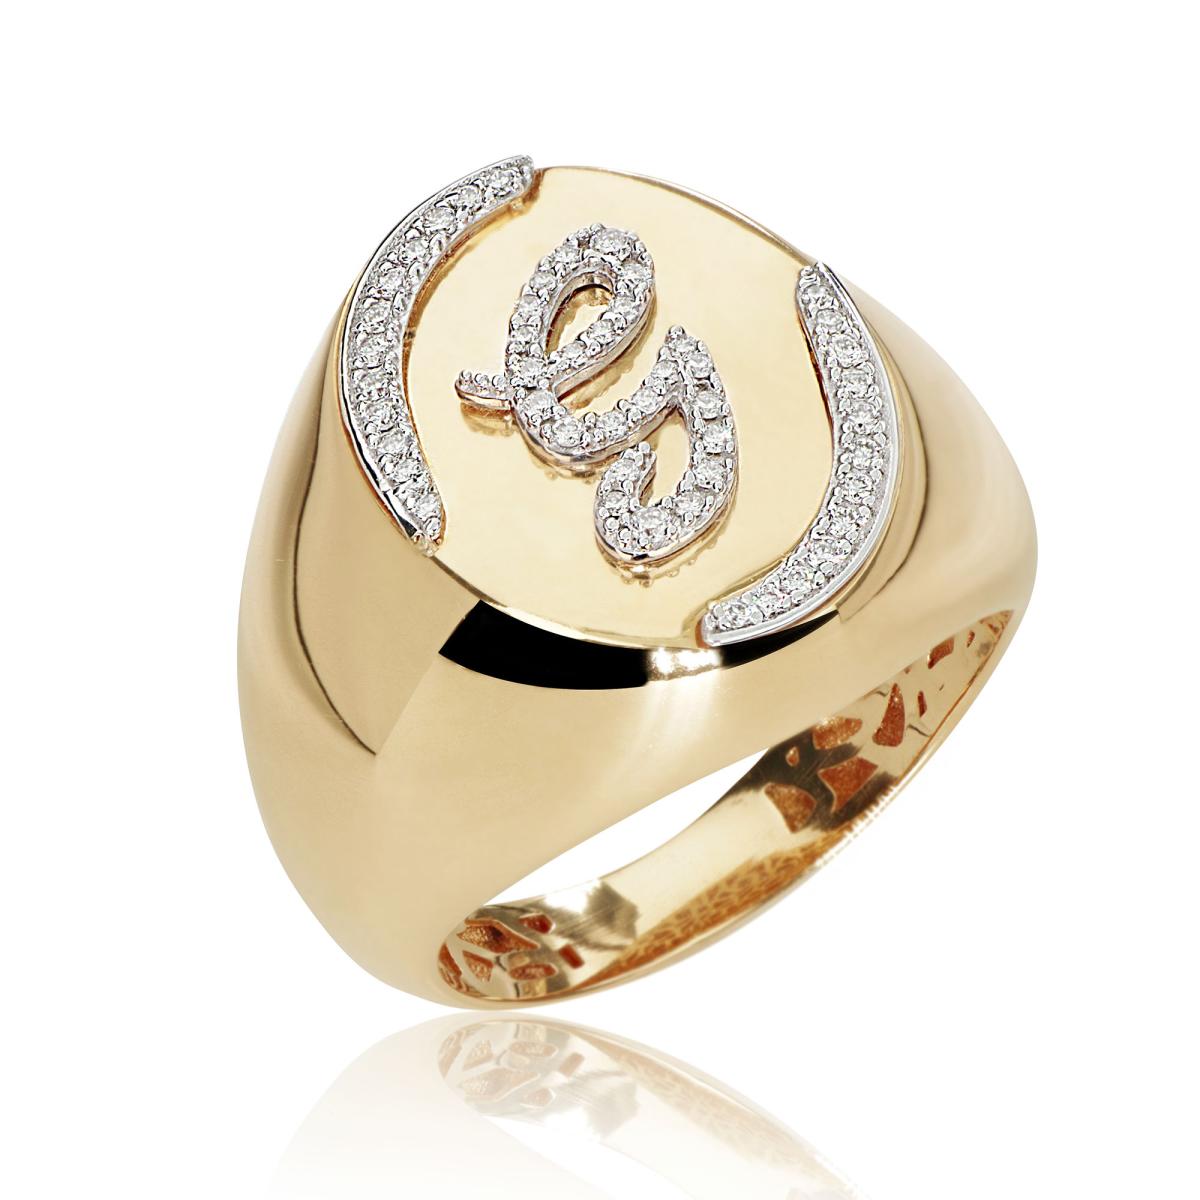 Chevalier ring in 18 kt gold, with customizable initial in diamonds - AD894